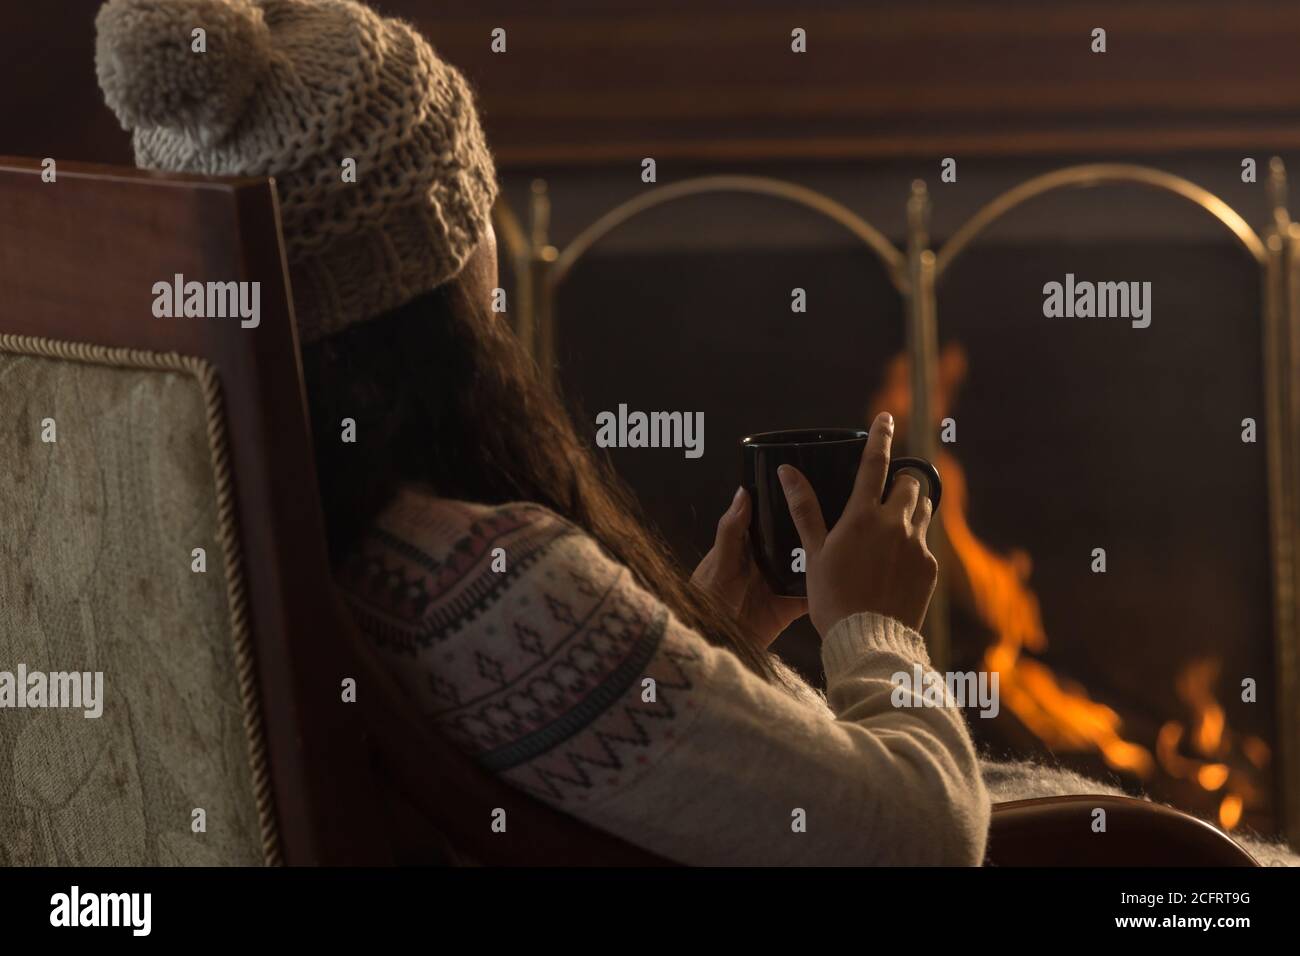 young Latin woman sitting on backwards, wearing a cap and wool sweater, in front of a lit fireplace, with a black cup in her hands Stock Photo